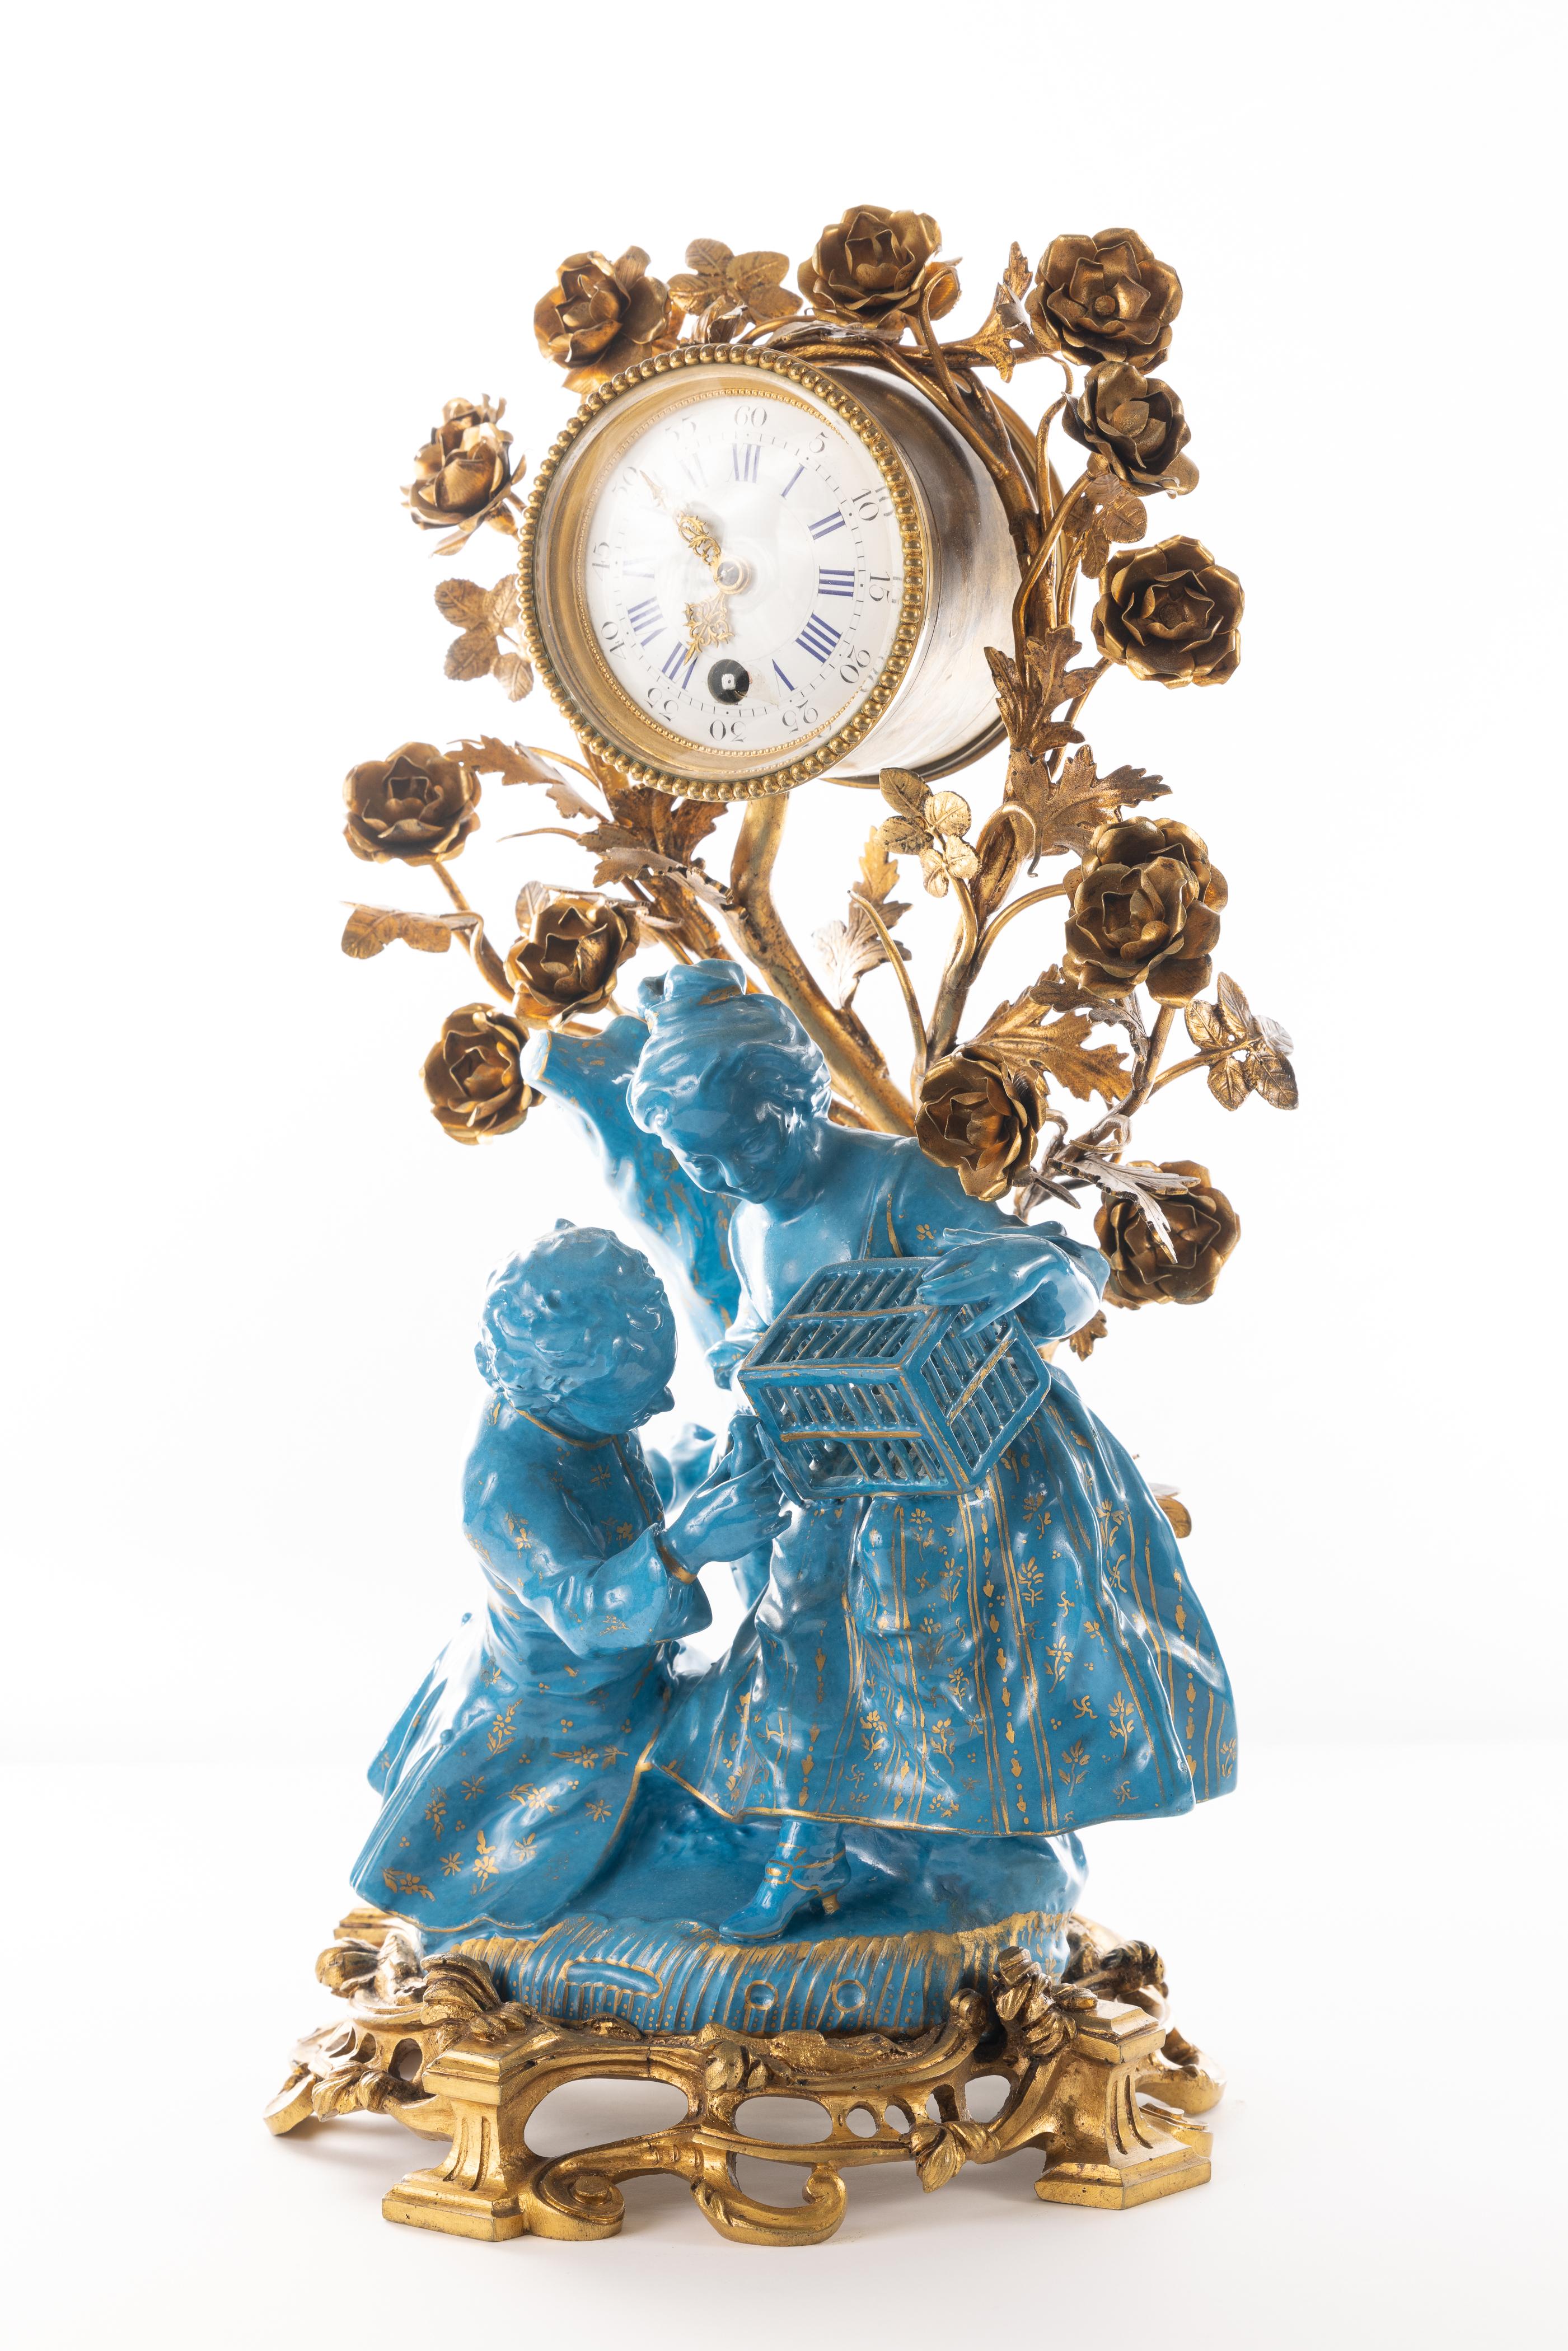 19thC Louis XV Rococo Ormolu & Porcelain Clock - Gold Figurative Sculpture by Unknown